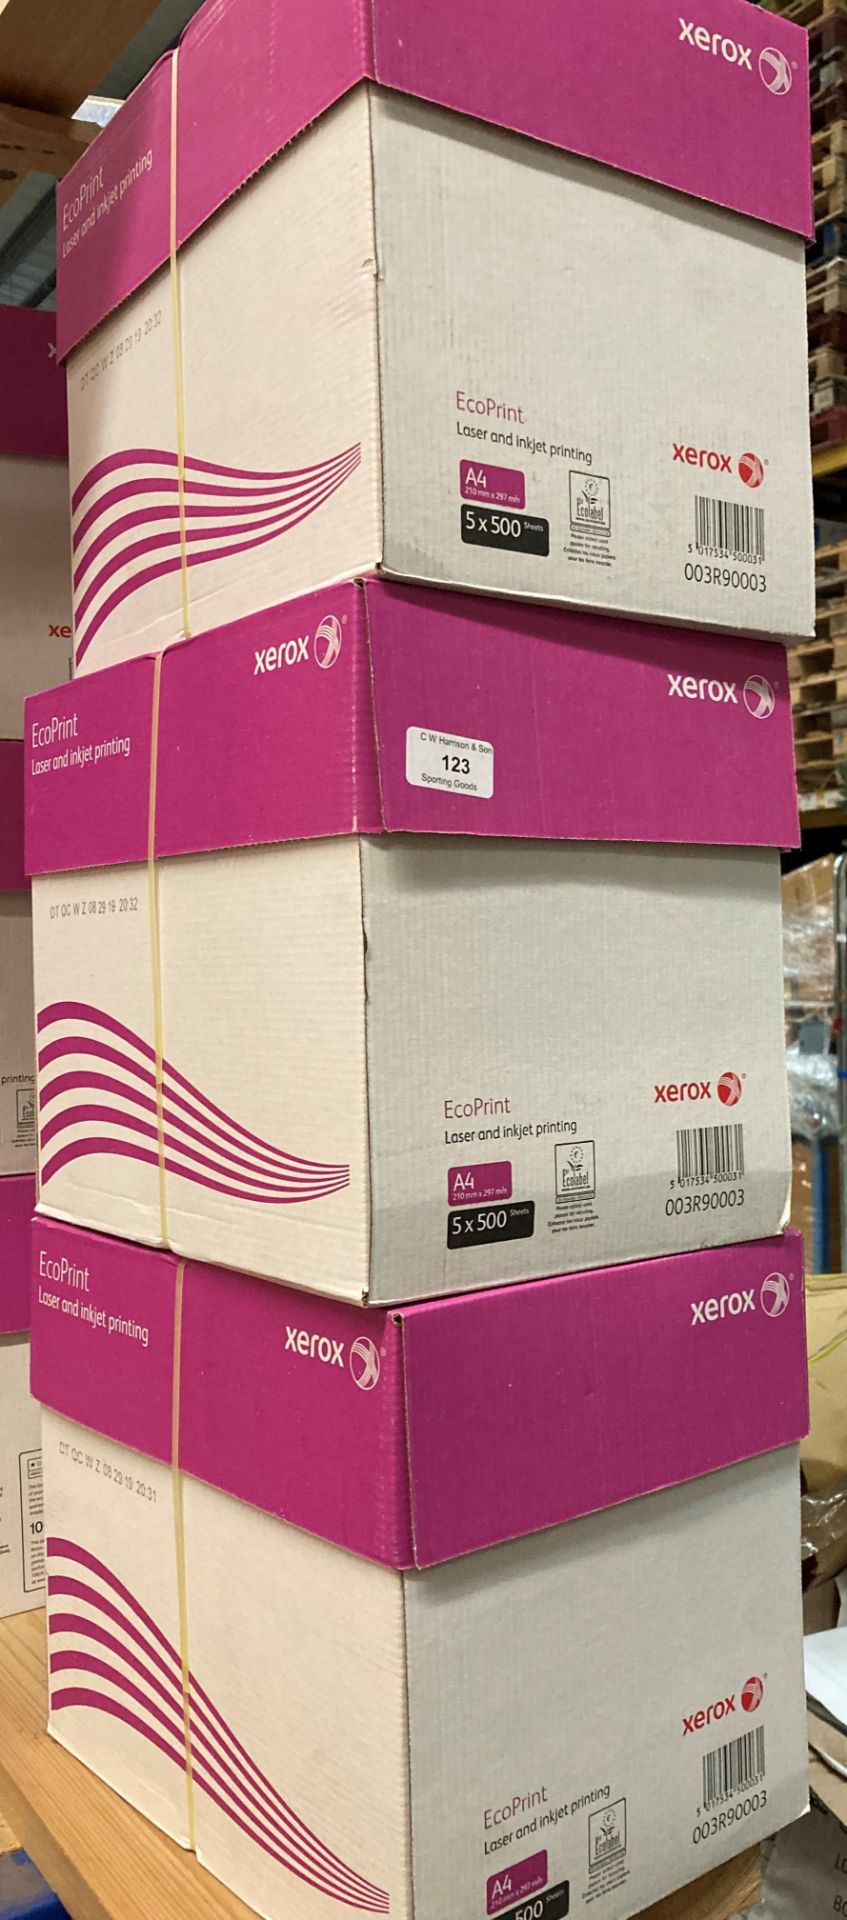 3 x boxes of Xerox EcoPrint Laser and Inkjet A4 printing paper (5 x 500 sheets per box)